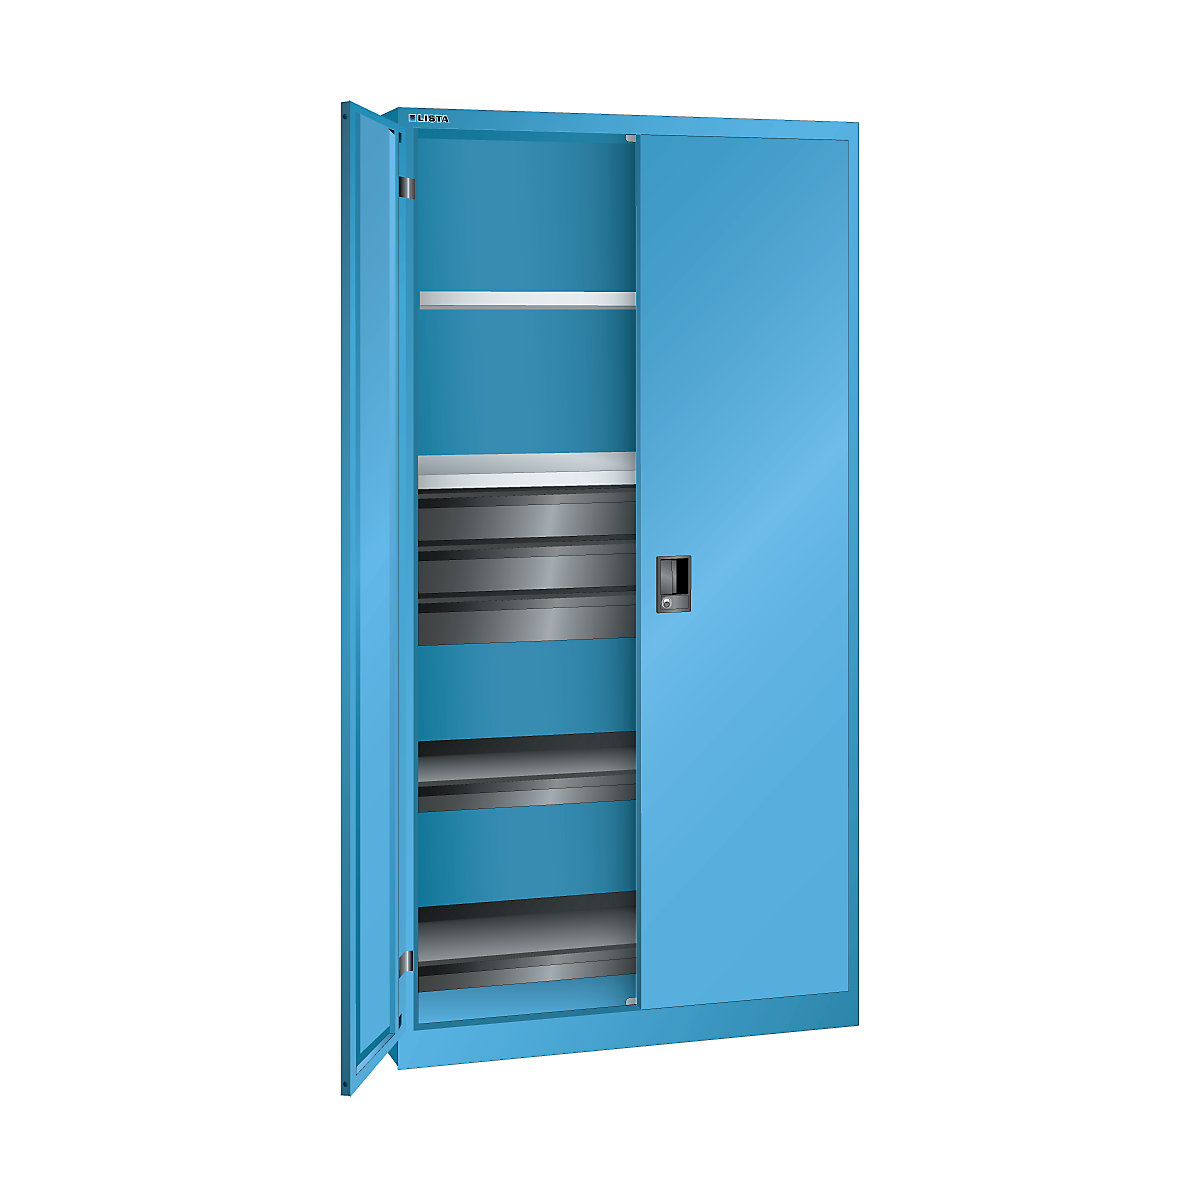 Double door cupboard, HxWxD 1950 x 1000 x 580 mm – LISTA, empty housing with 2 shelves, 2 pull-out shelves and 3 drawers, light blue-9